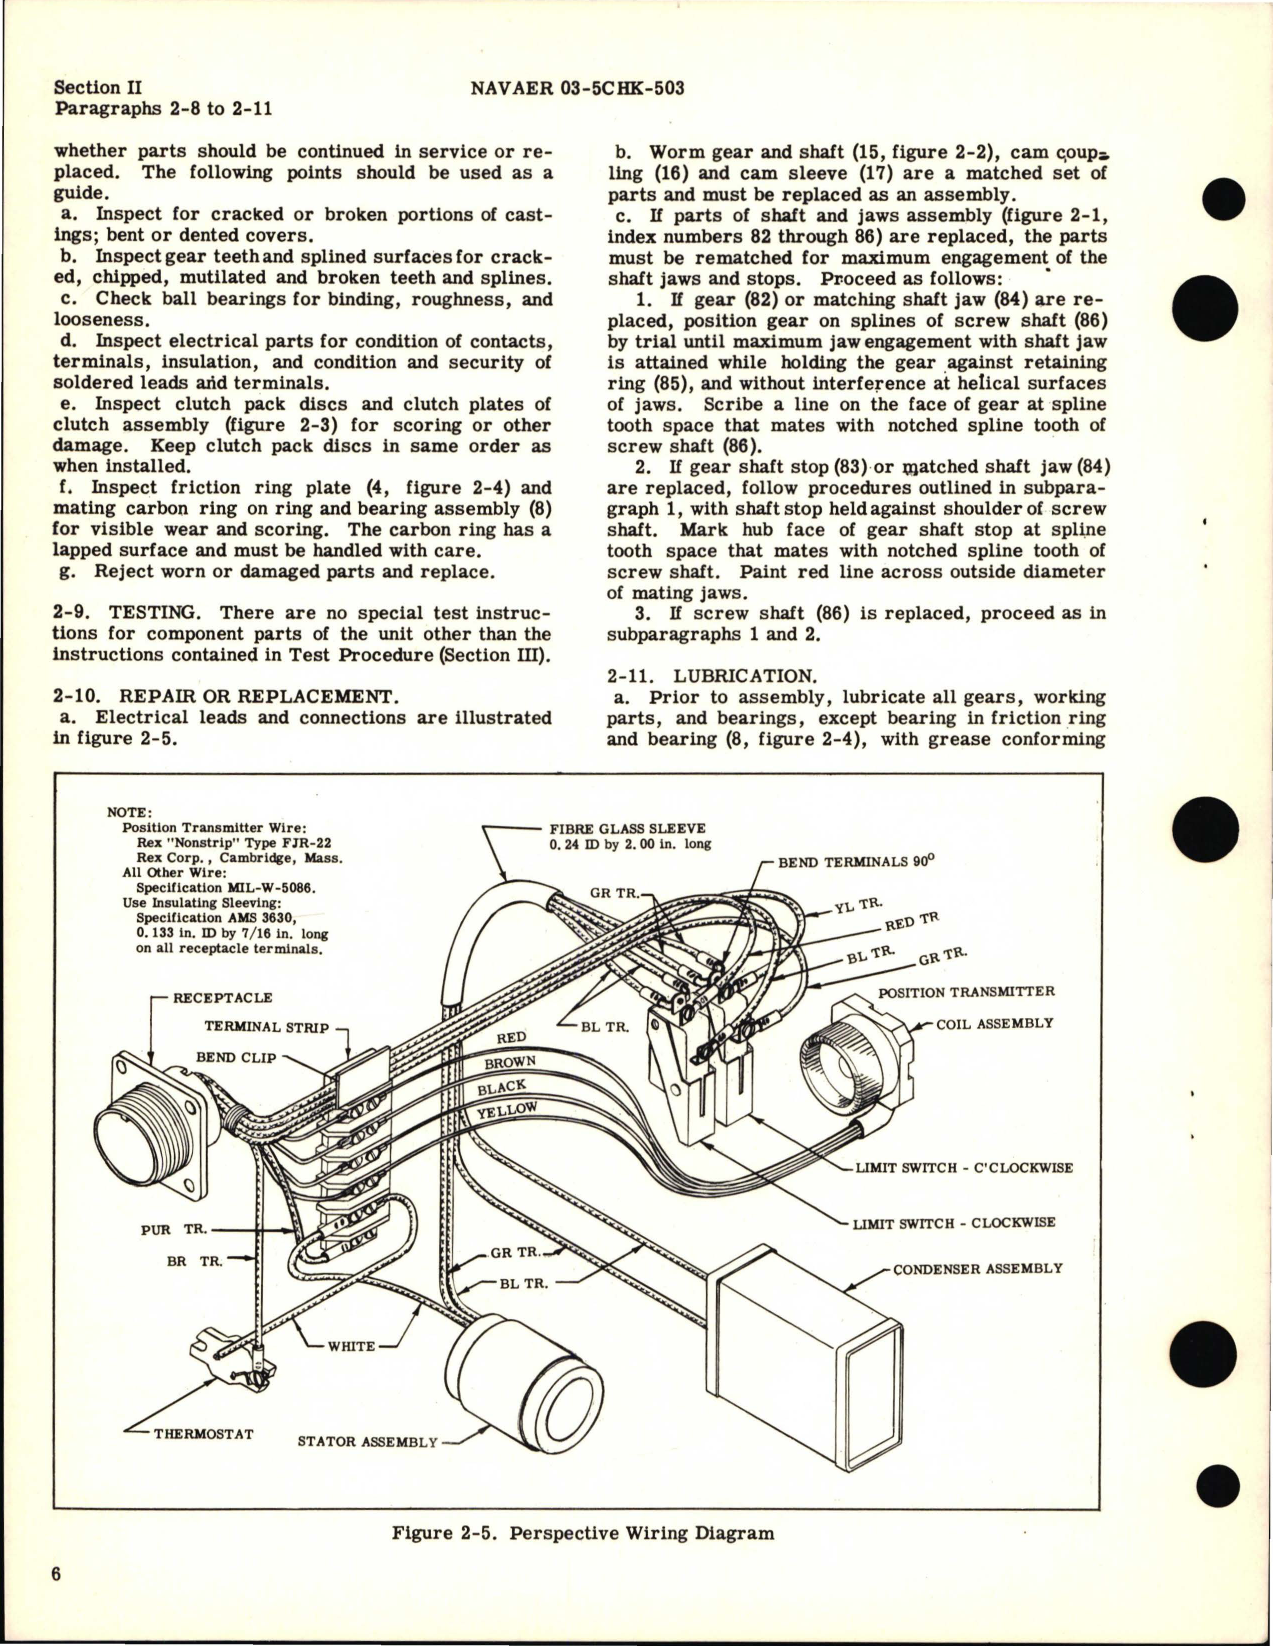 Sample page 8 from AirCorps Library document: Overhaul Instructions for Actuator Assy - Elevator Trim Tab Part No. AL-1287-14, Type 304-1-A